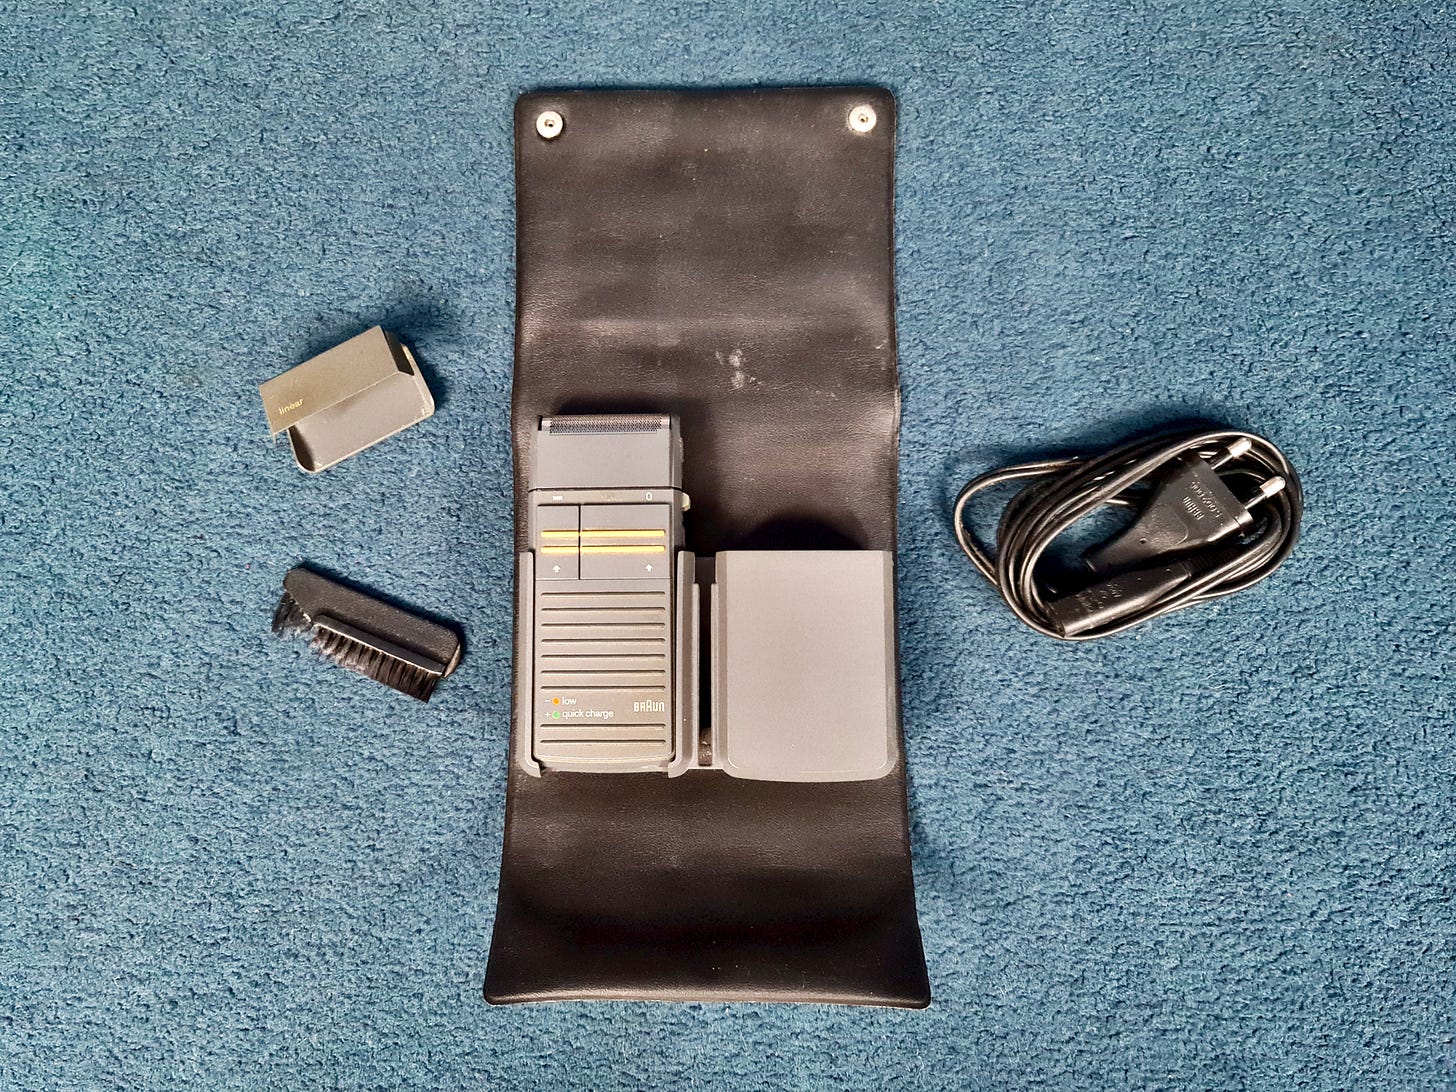 A 1990 Braun Linear electric razor in its soft case, with the end cover, brush, and cable to the side